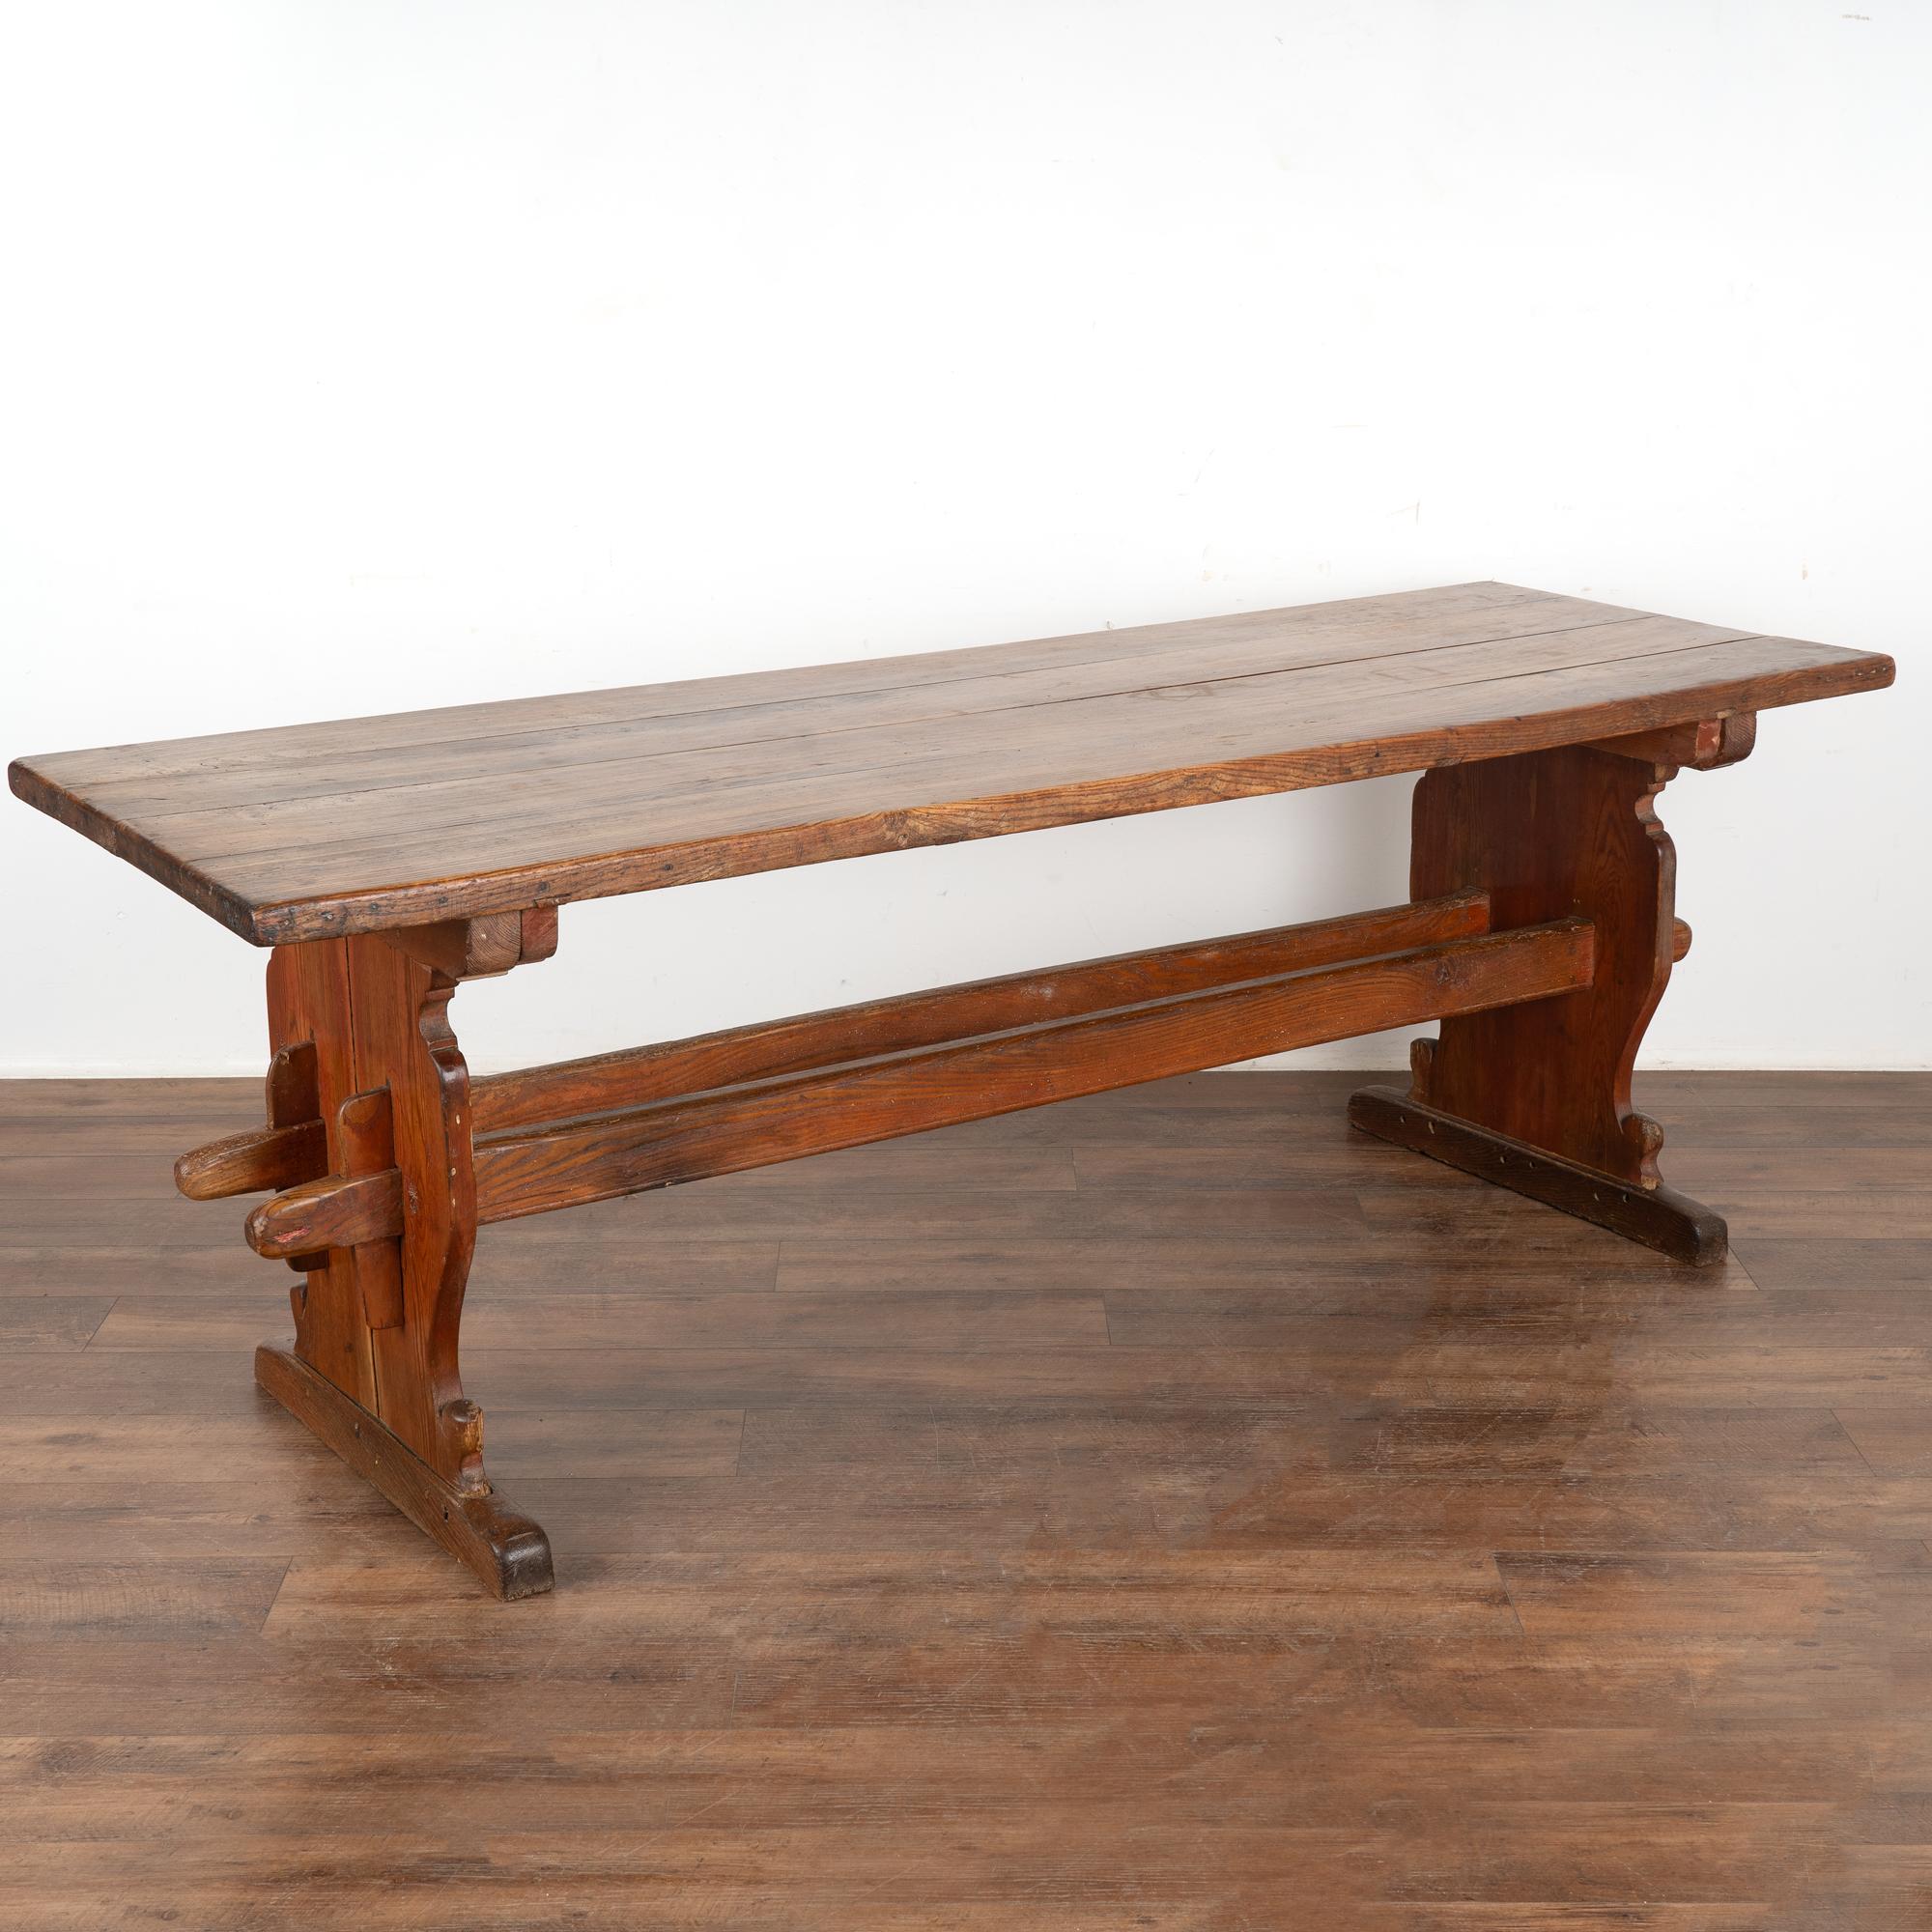 Farm Dining Kitchen Table With Trestle Base, Denmark circa 1820-40 For Sale 3